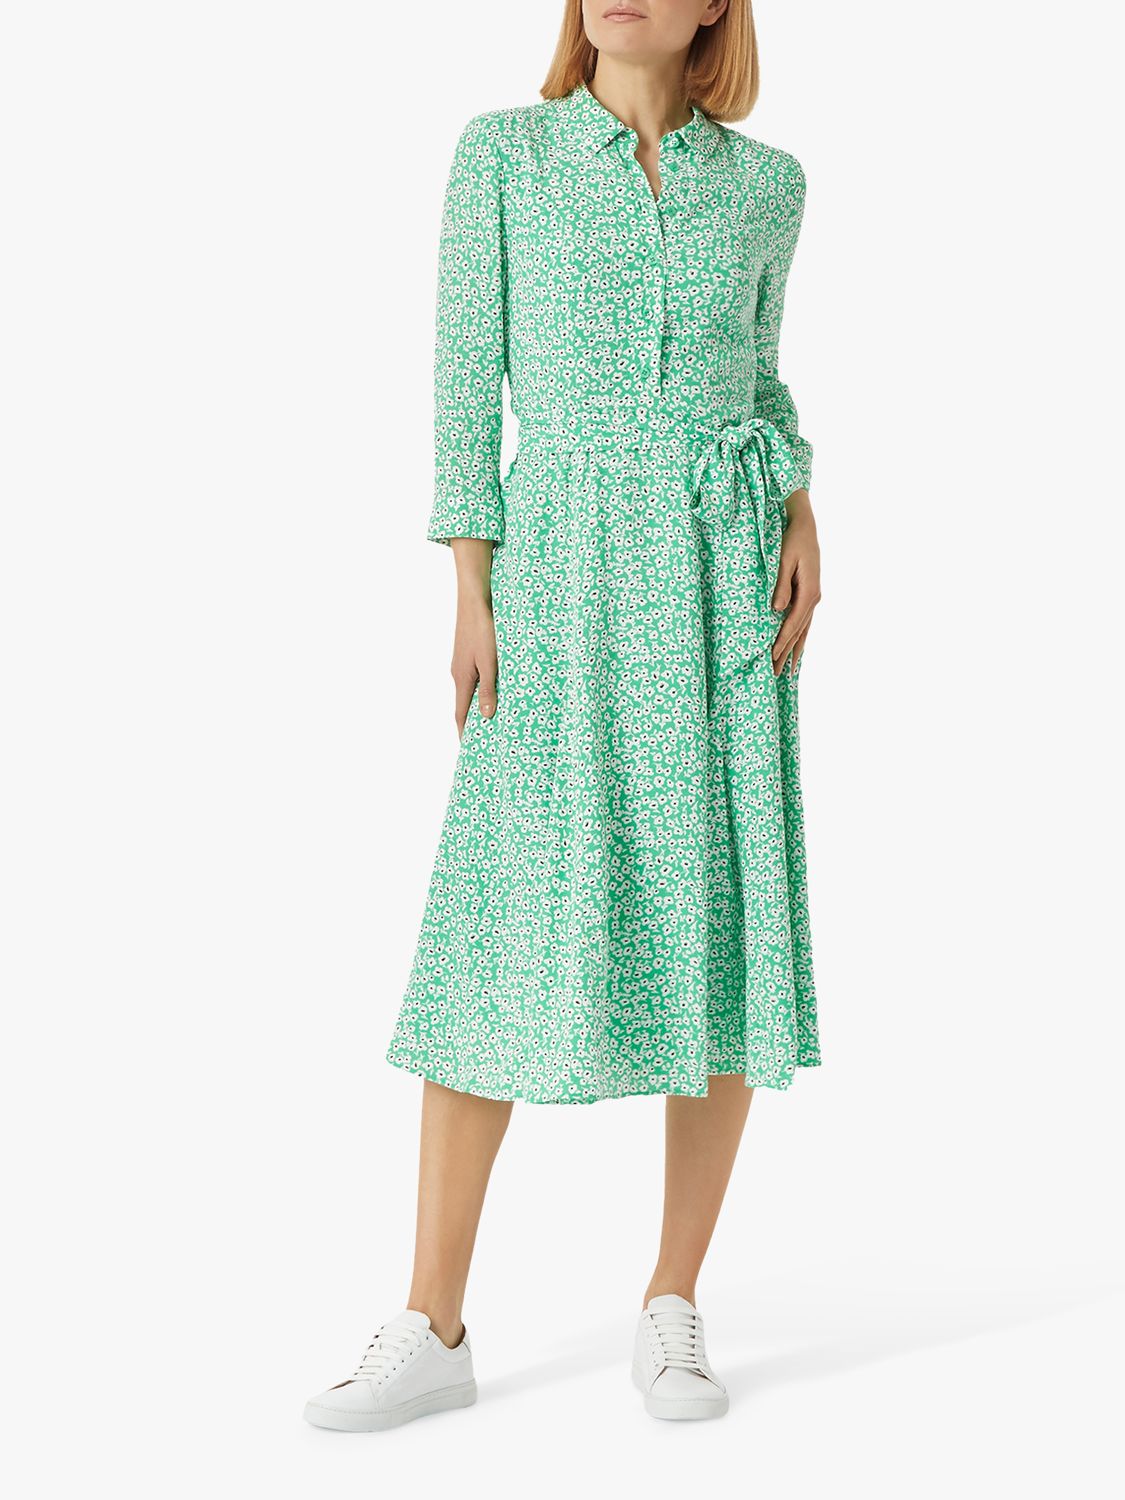 Hobbs Summer Dresses 2019 Outlet Store, UP TO 60% OFF | www.loop 